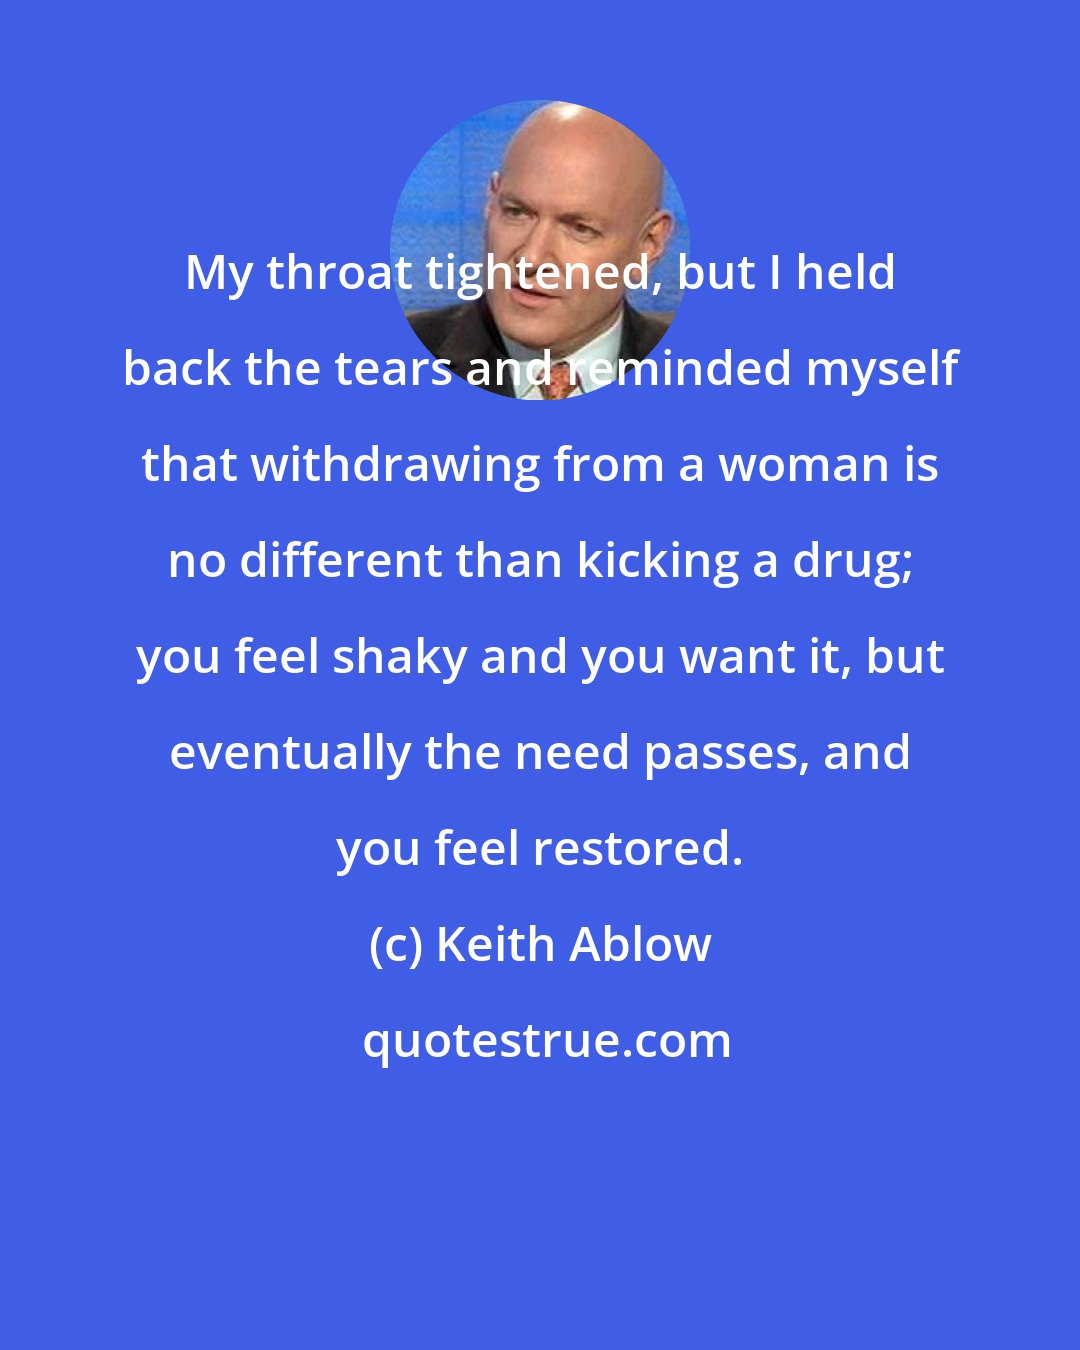 Keith Ablow: My throat tightened, but I held back the tears and reminded myself that withdrawing from a woman is no different than kicking a drug; you feel shaky and you want it, but eventually the need passes, and you feel restored.